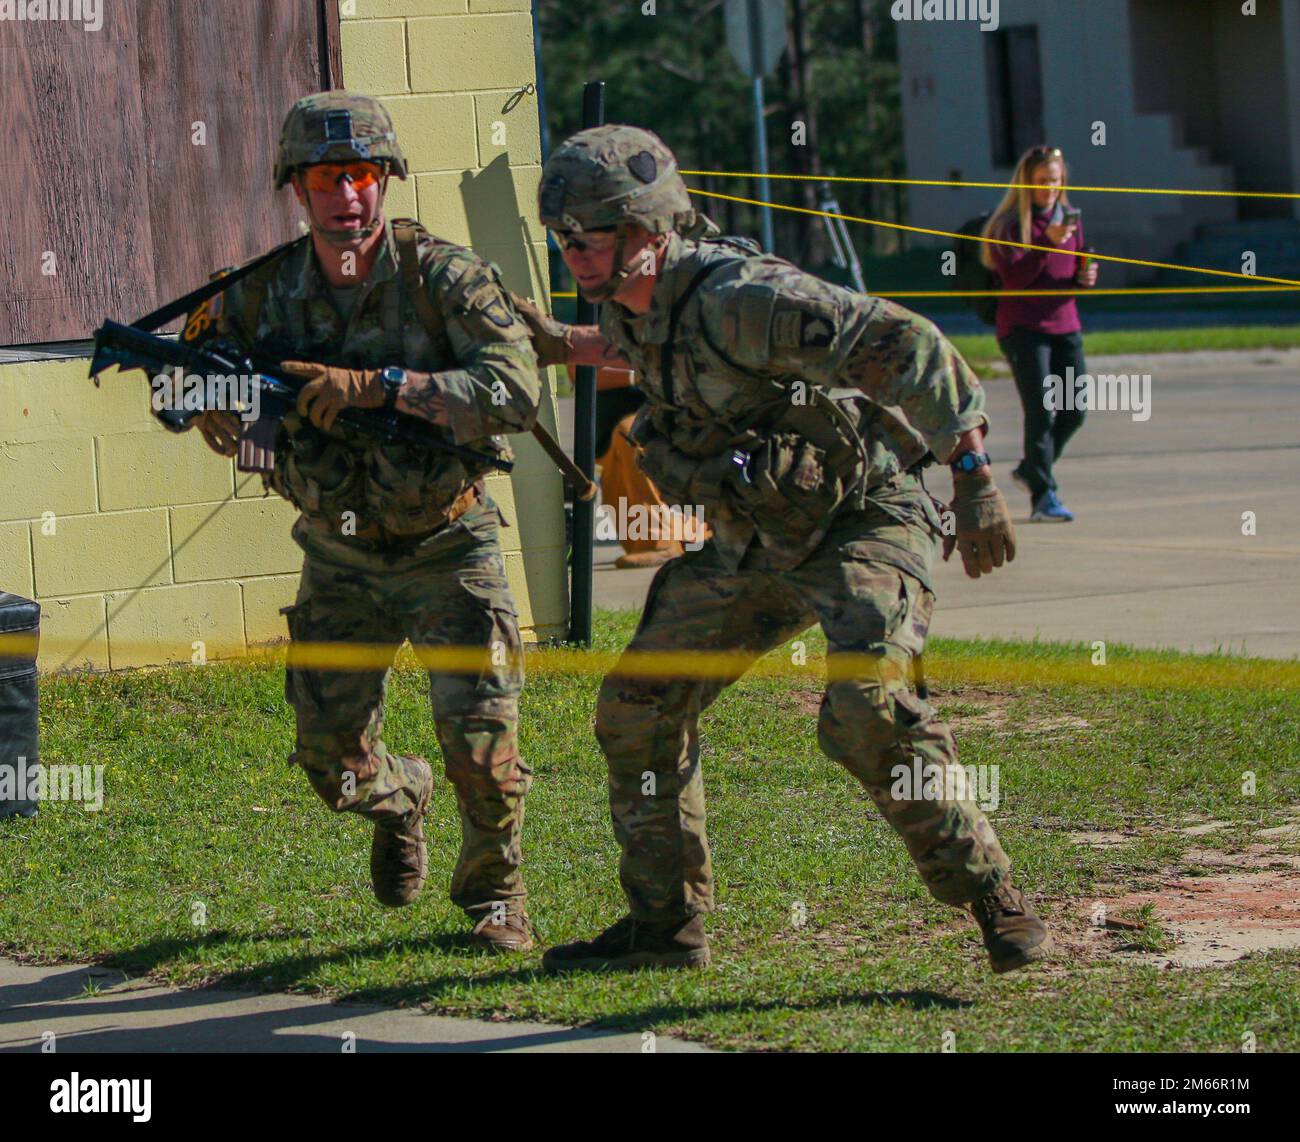 1st Lt. Aaron Arturi (left) and 1st Lt. John Ryan from the 101st Airborne Division (Air Assault),  takes on the Buddy Run event at the Annual Best Ranger Competition in Fort Benning, Ga on April 8th 2022. The Buddy Run event is team oriented, where the group of rangers must work together to execute the event in a timely manner. Stock Photo